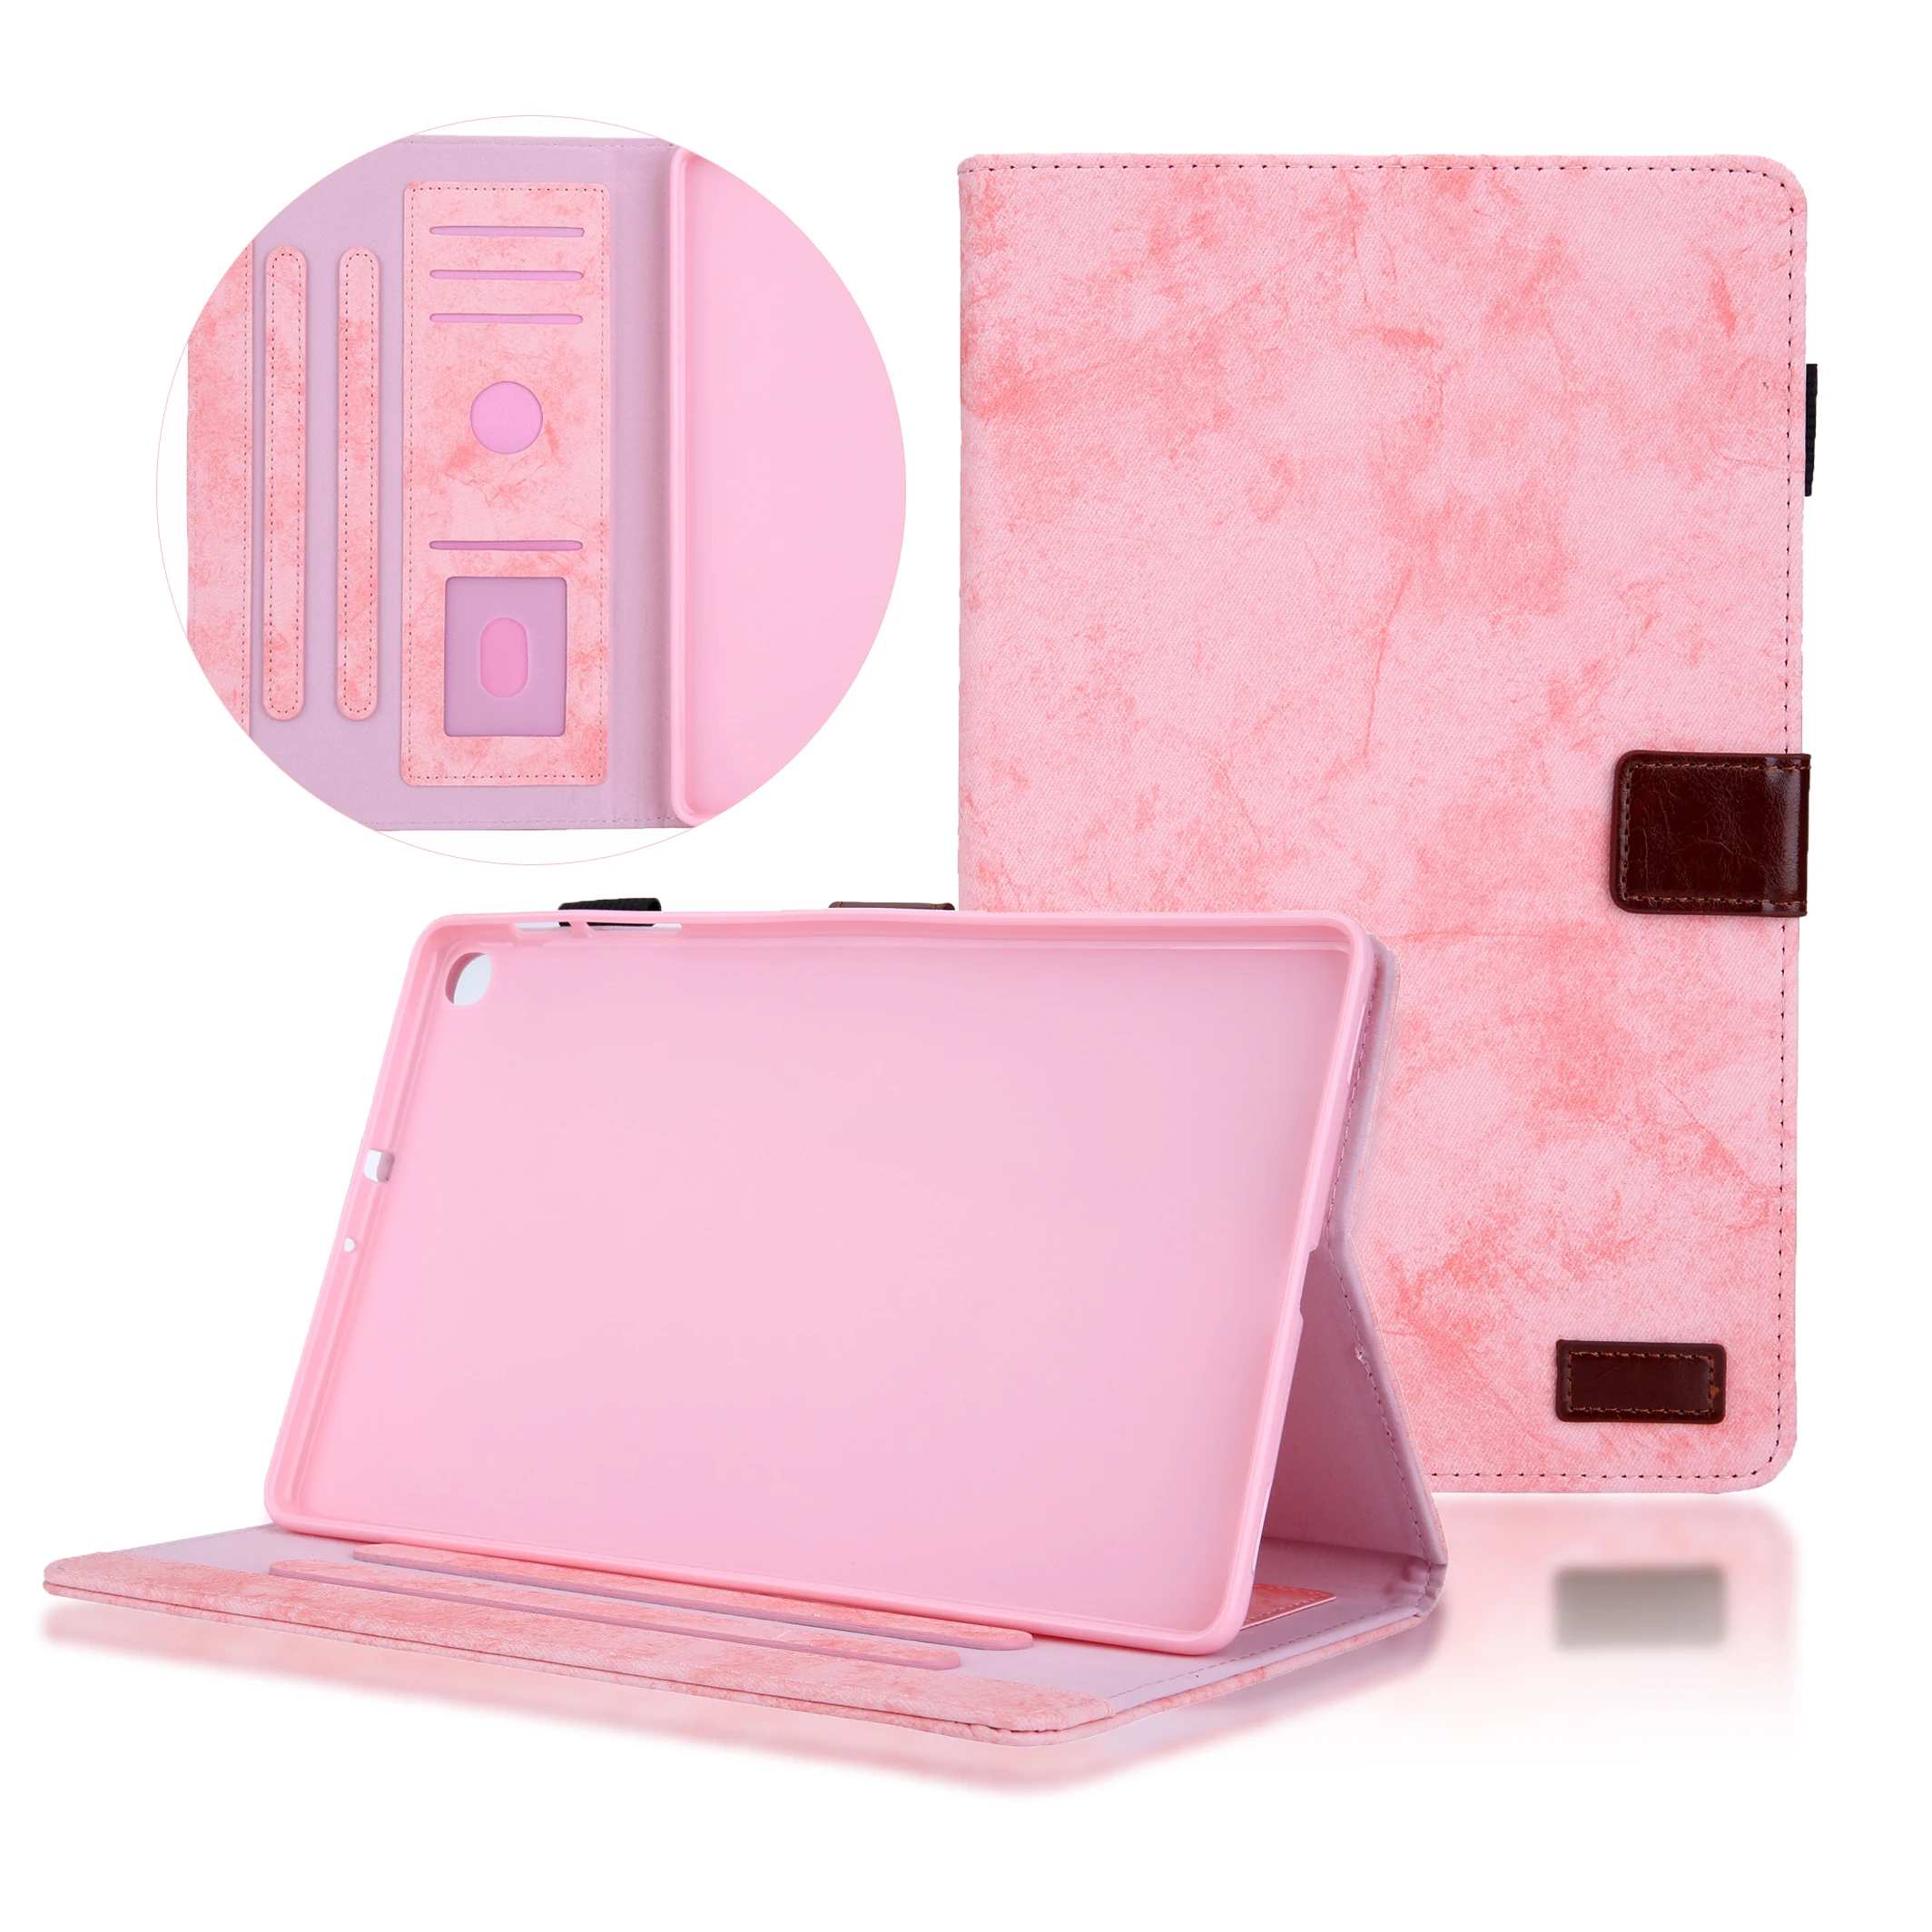 

Case For Samsung Galaxy Tab A 10.1 8.0 8.4 cover SM-T510 T515 T290 T295 P200 P205 T307U Business leather case Tablets capa Funda